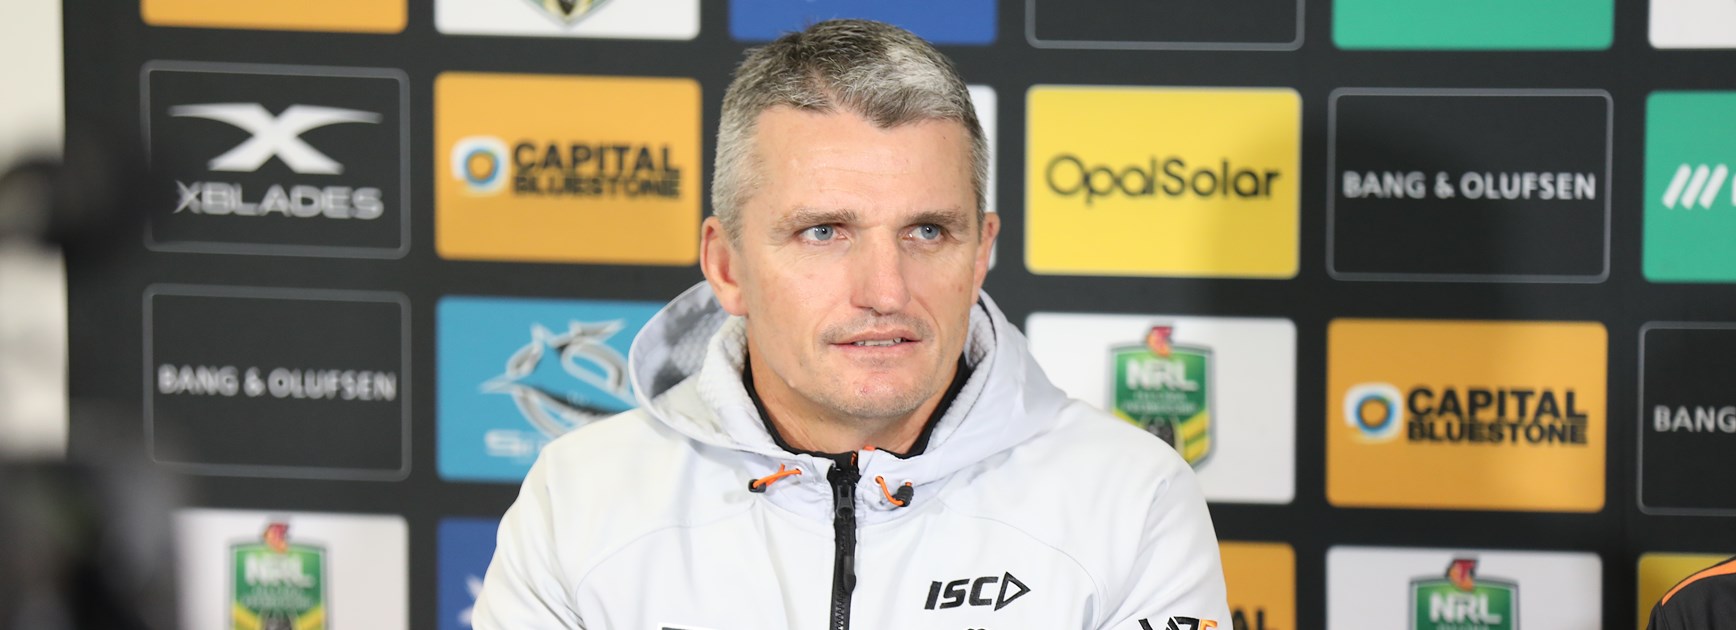 Cleary frustrated by failure to apply pressure